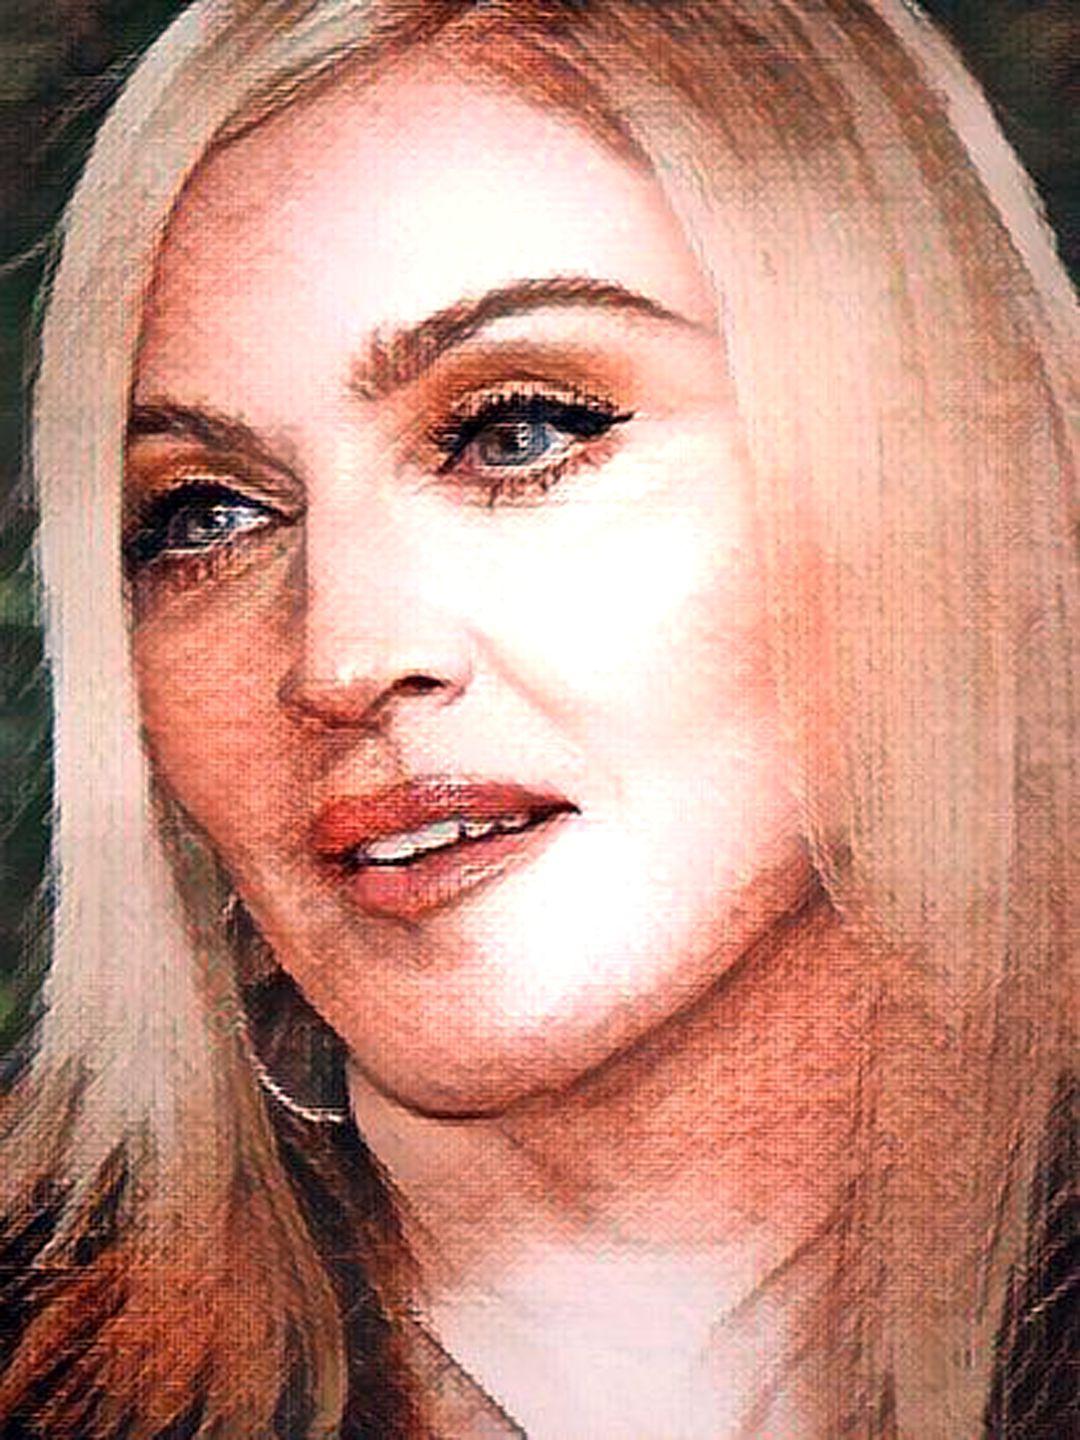 Bader Stier Xxx Sd - Madonna # 36 - Celeb ART - Beautiful Artworks of Celebrities, Footballers,  Politicians and Famous People in World | OpenSea